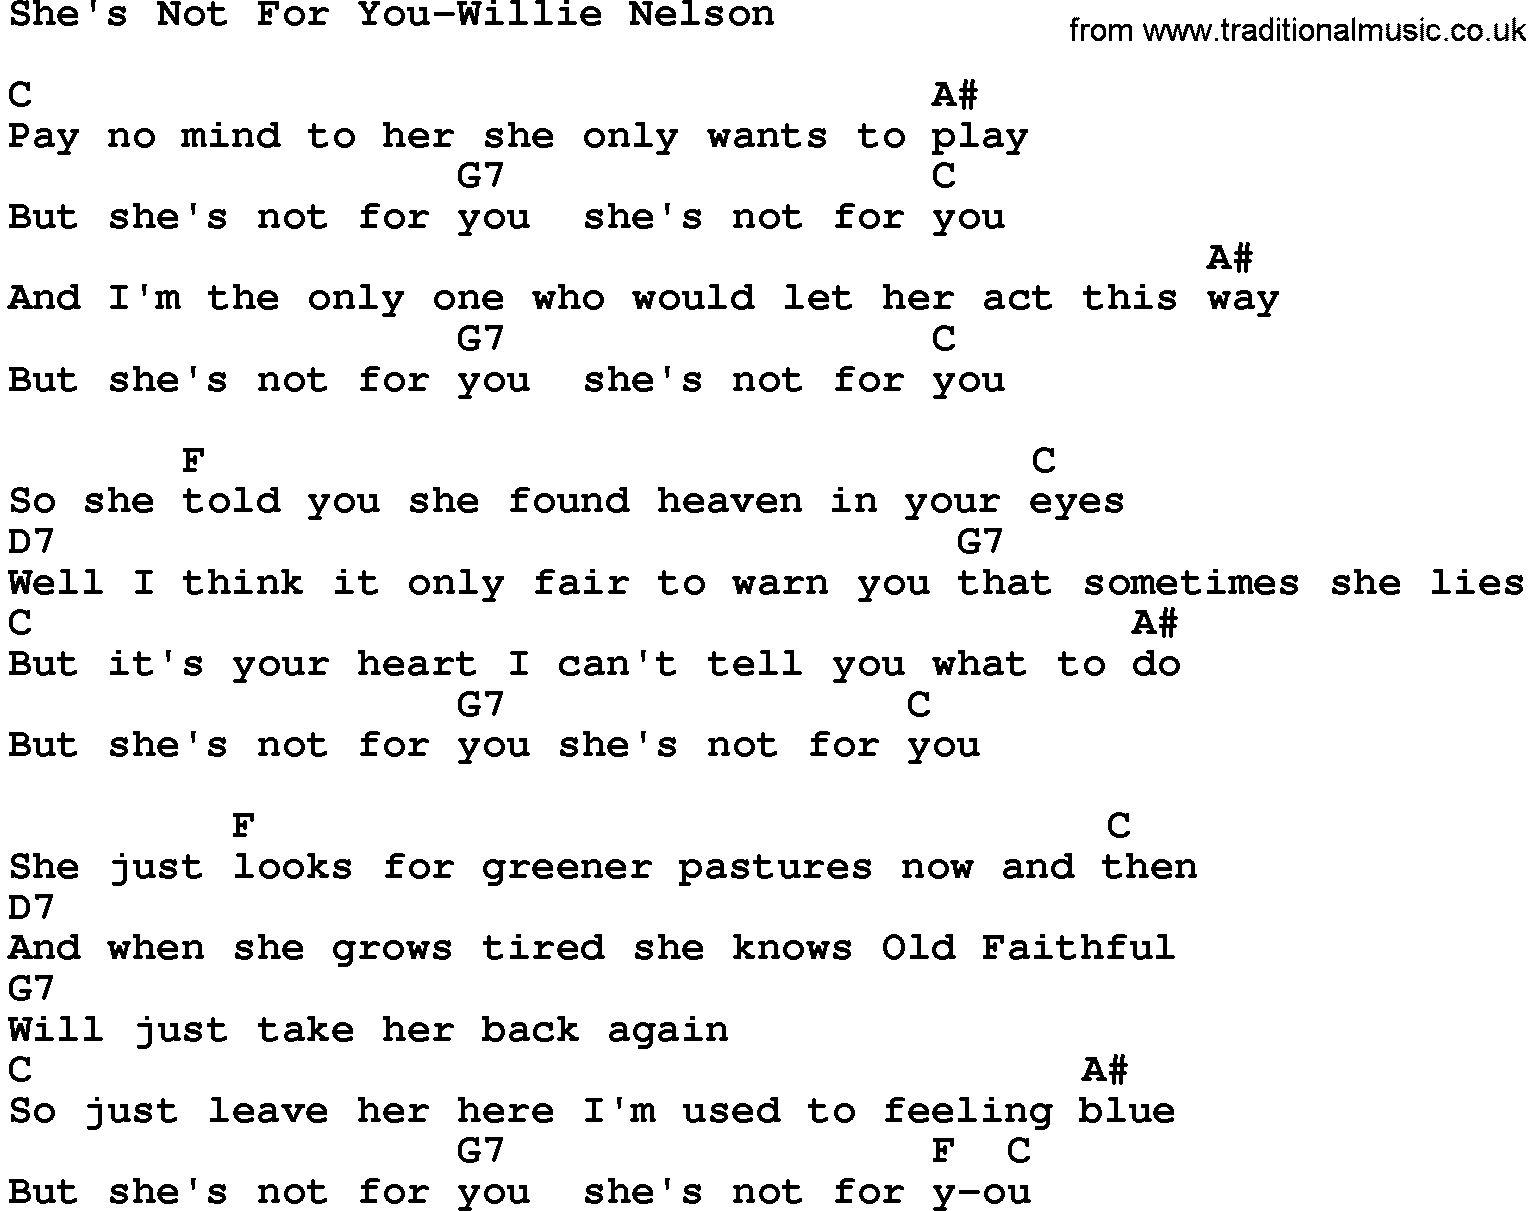 Country music song: She's Not For You-Willie Nelson lyrics and chords